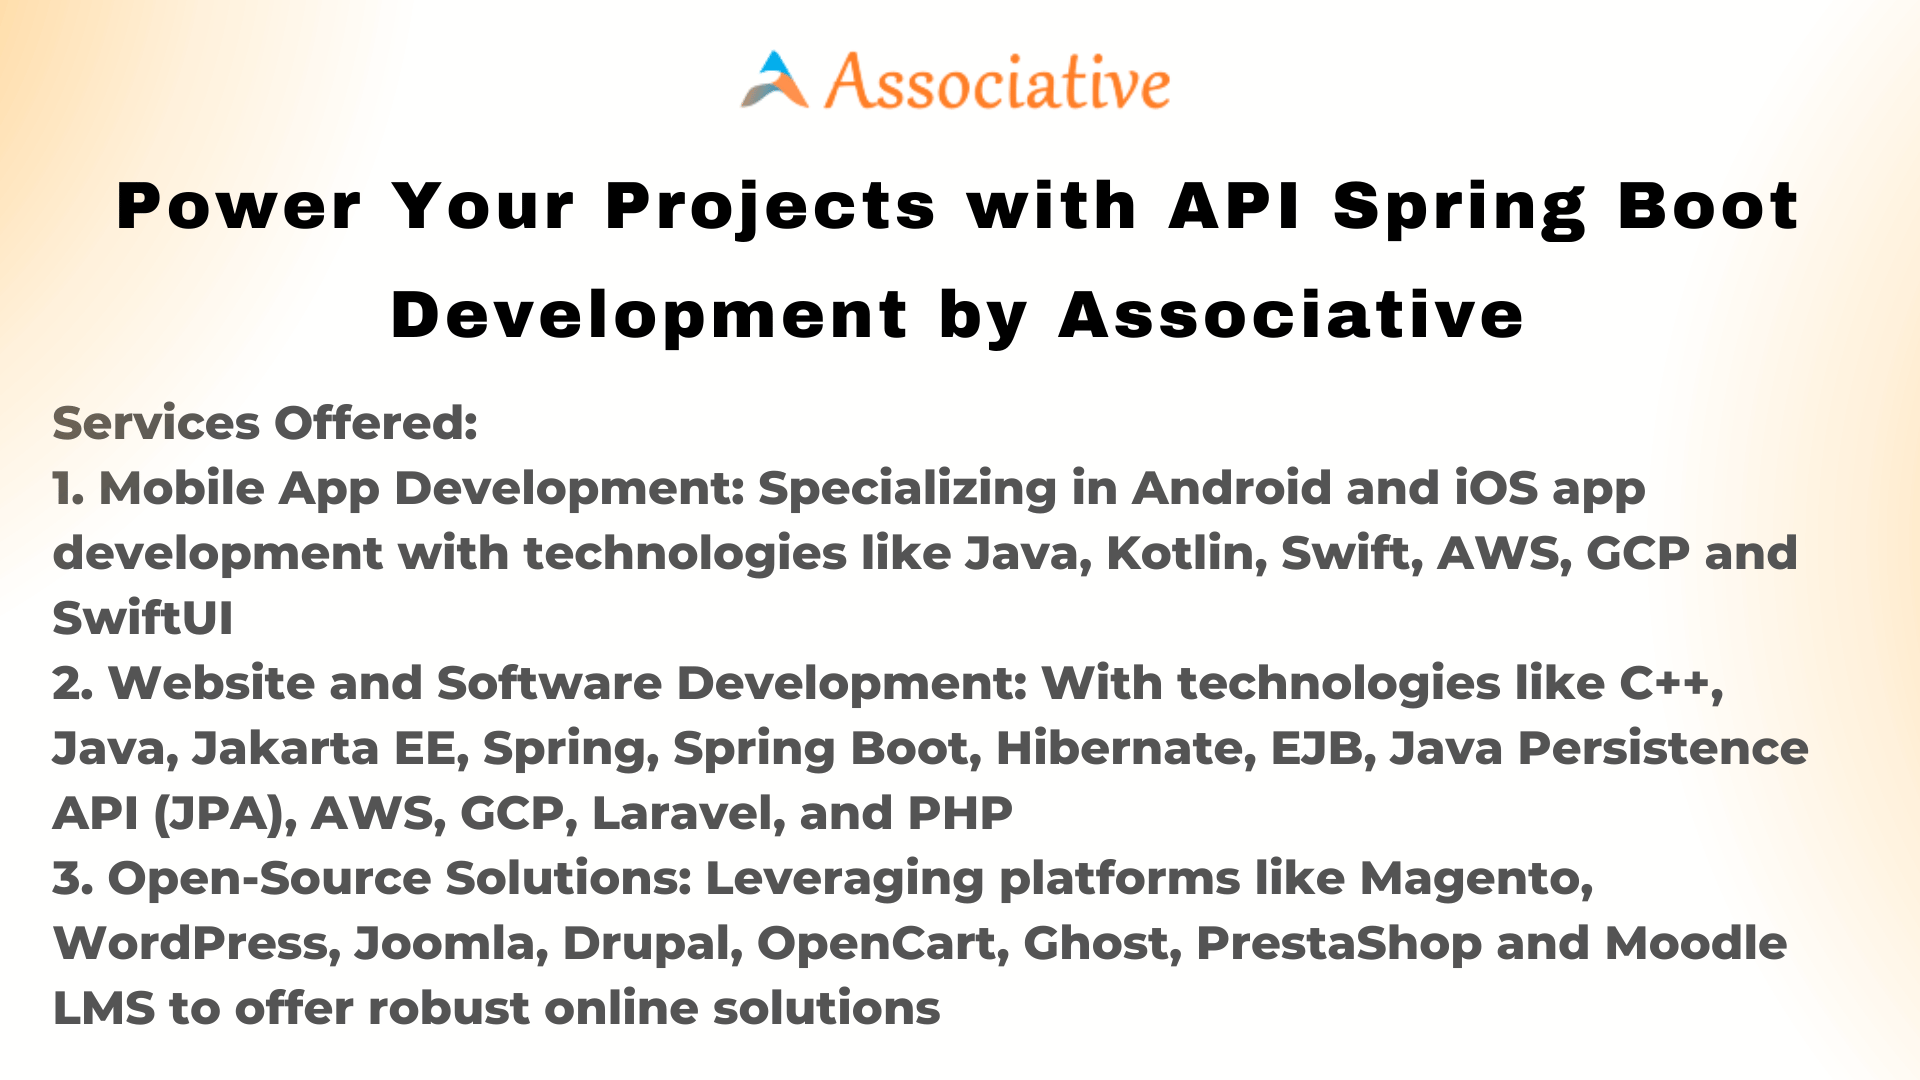 Power Your Projects with API Spring Boot Development by Associative